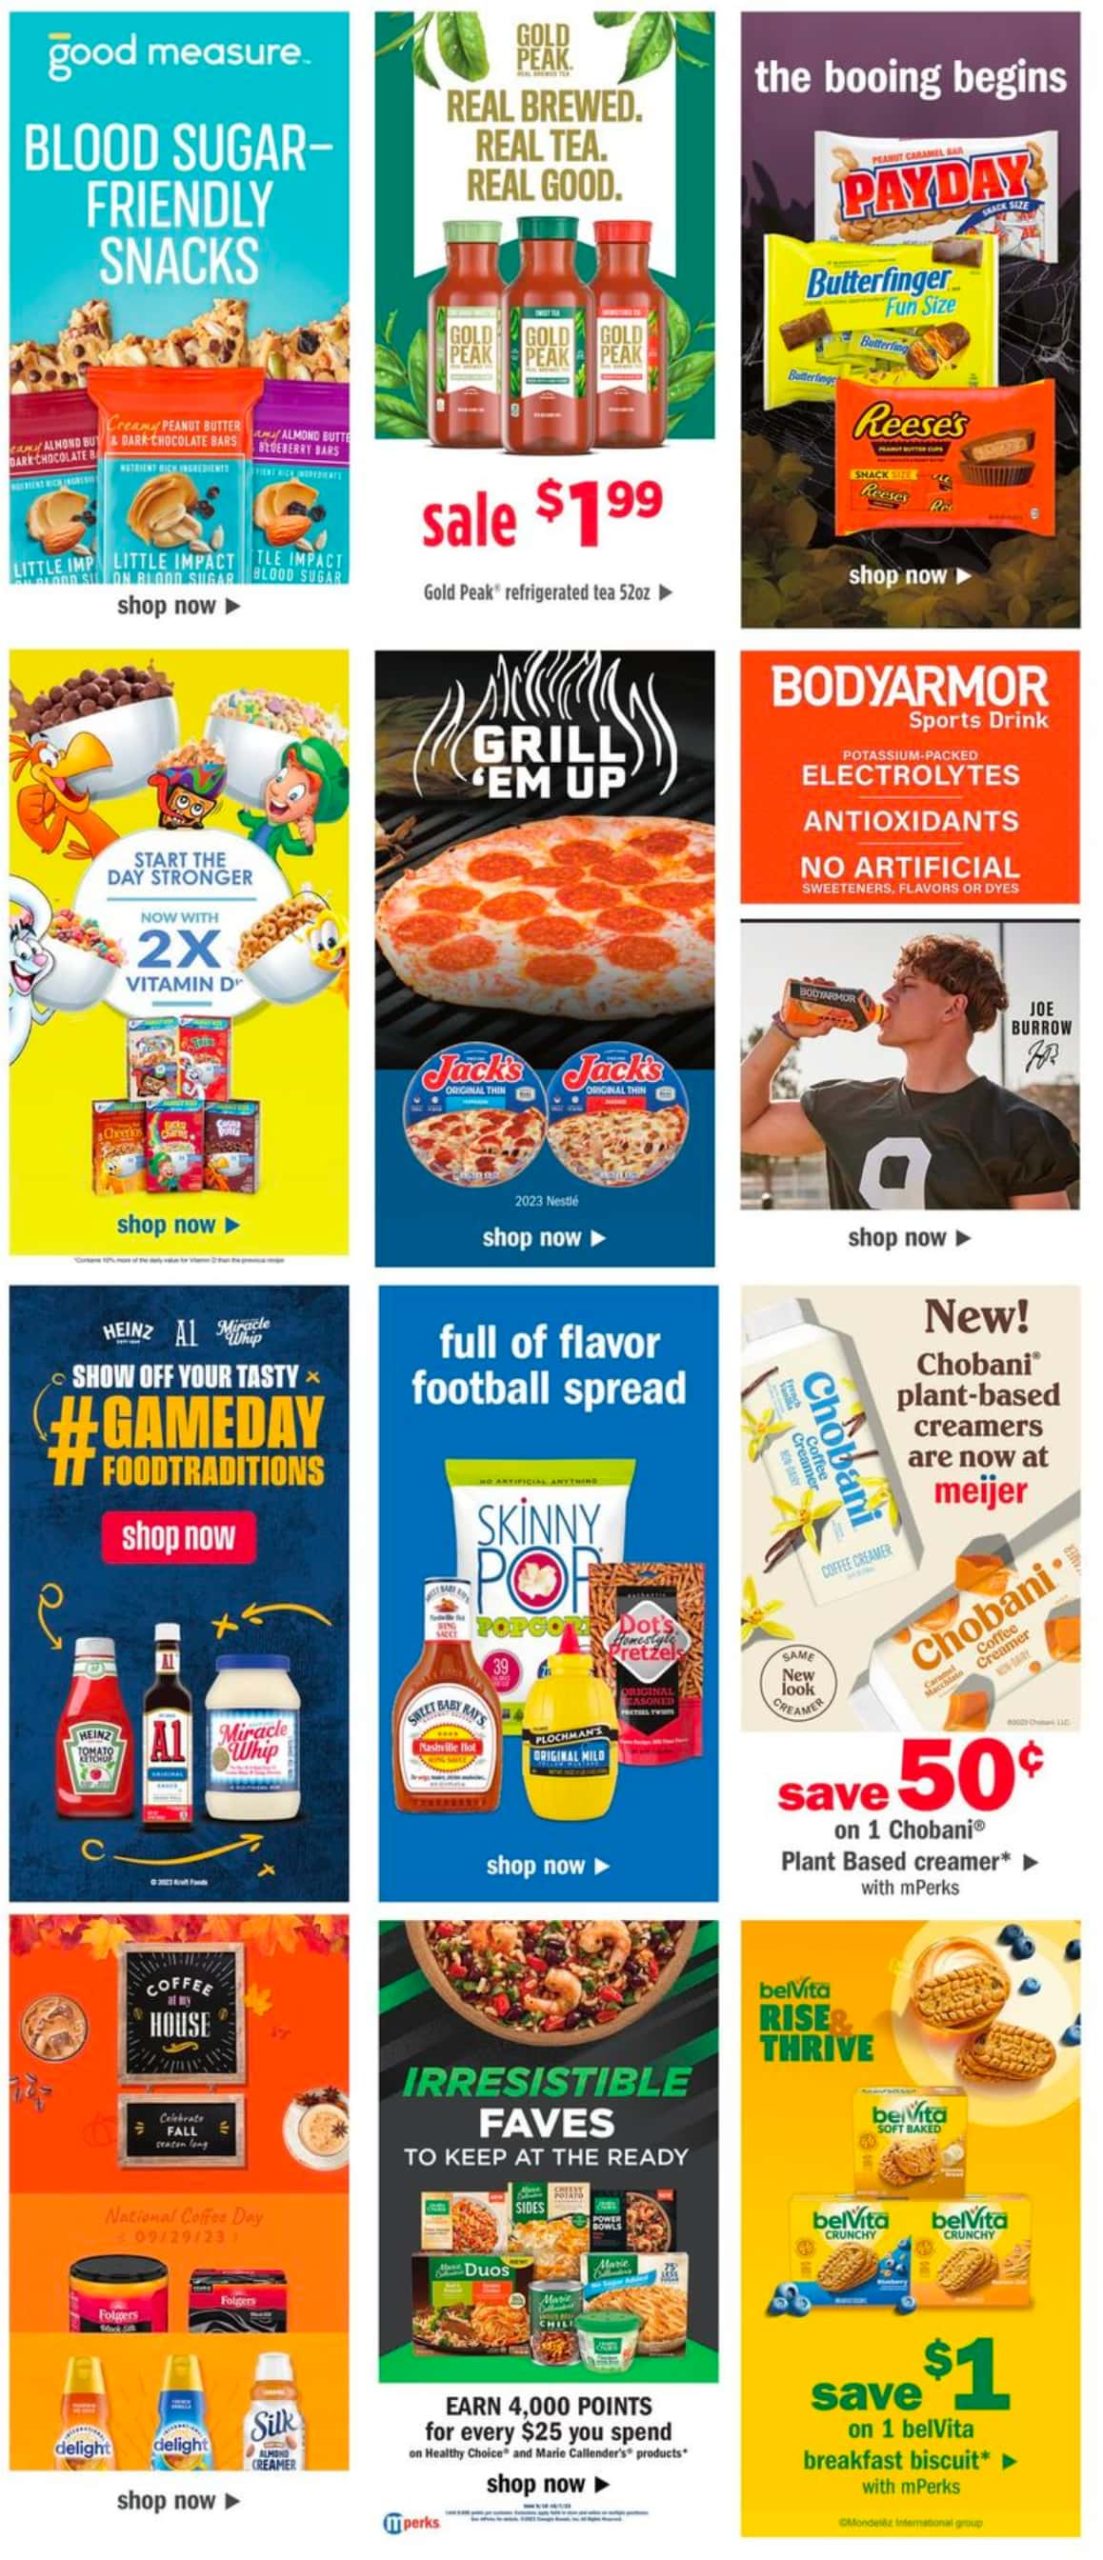 Meijer Weekly Ad May 1 to May 7, 2022 2 – meijer ad 3 scaled